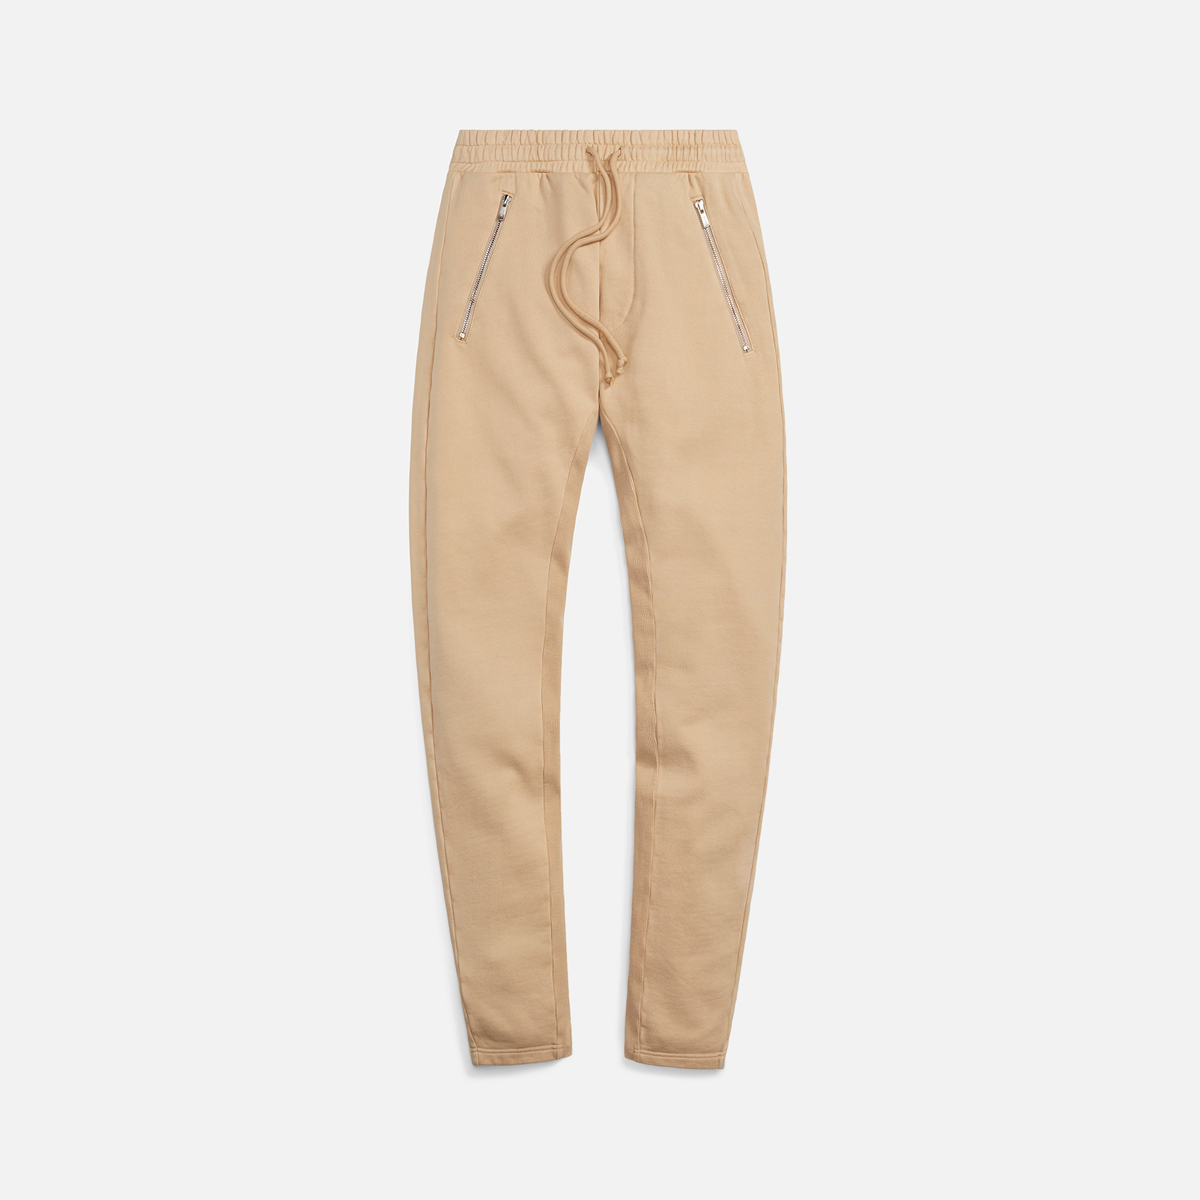 kith-fall-winter-2021-collection-bottoms-21